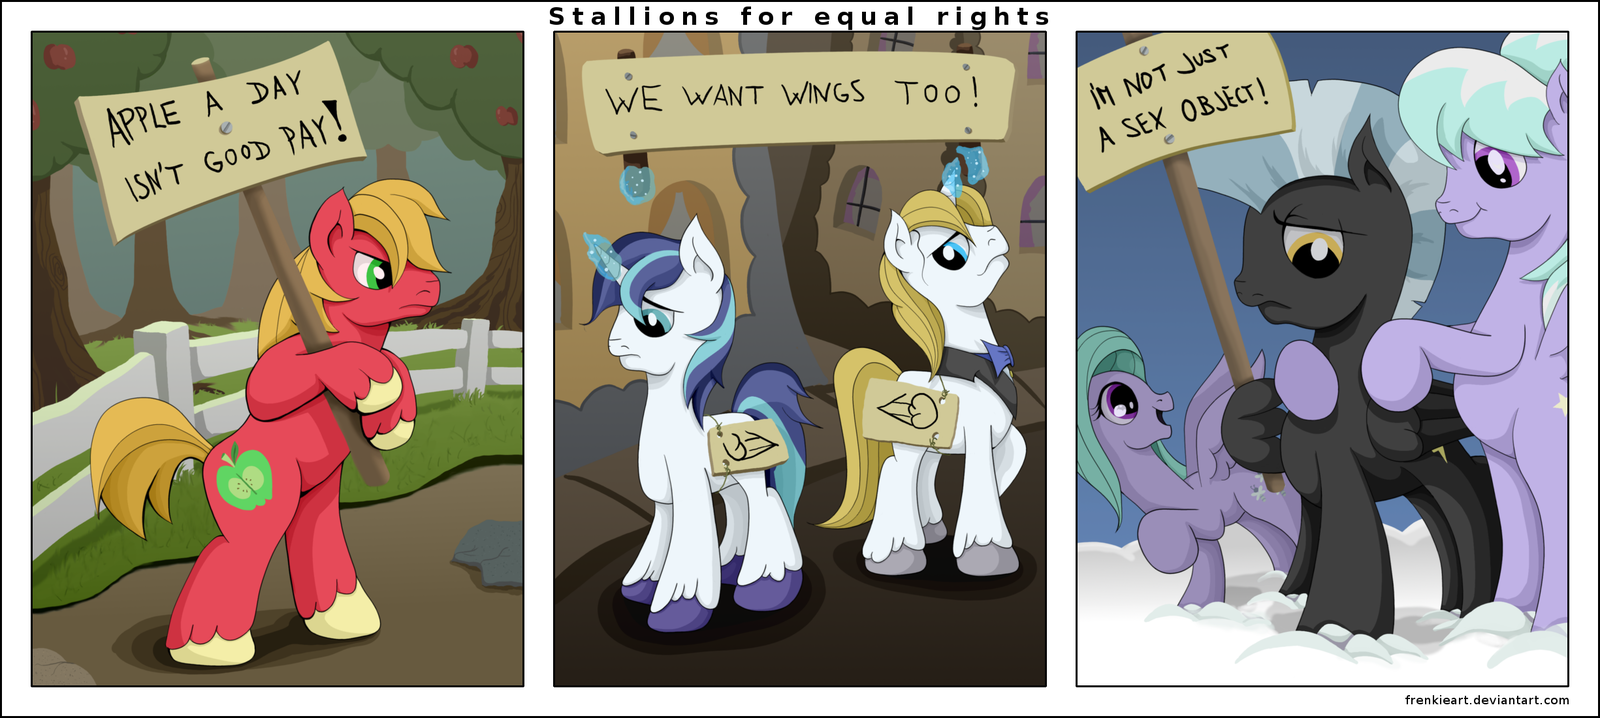 Yesterday all over Equestria - My little pony, March 8, Equality, Big Macintosh, Shining armor, Prince Blueblood, Thunderlane, MLP Edge